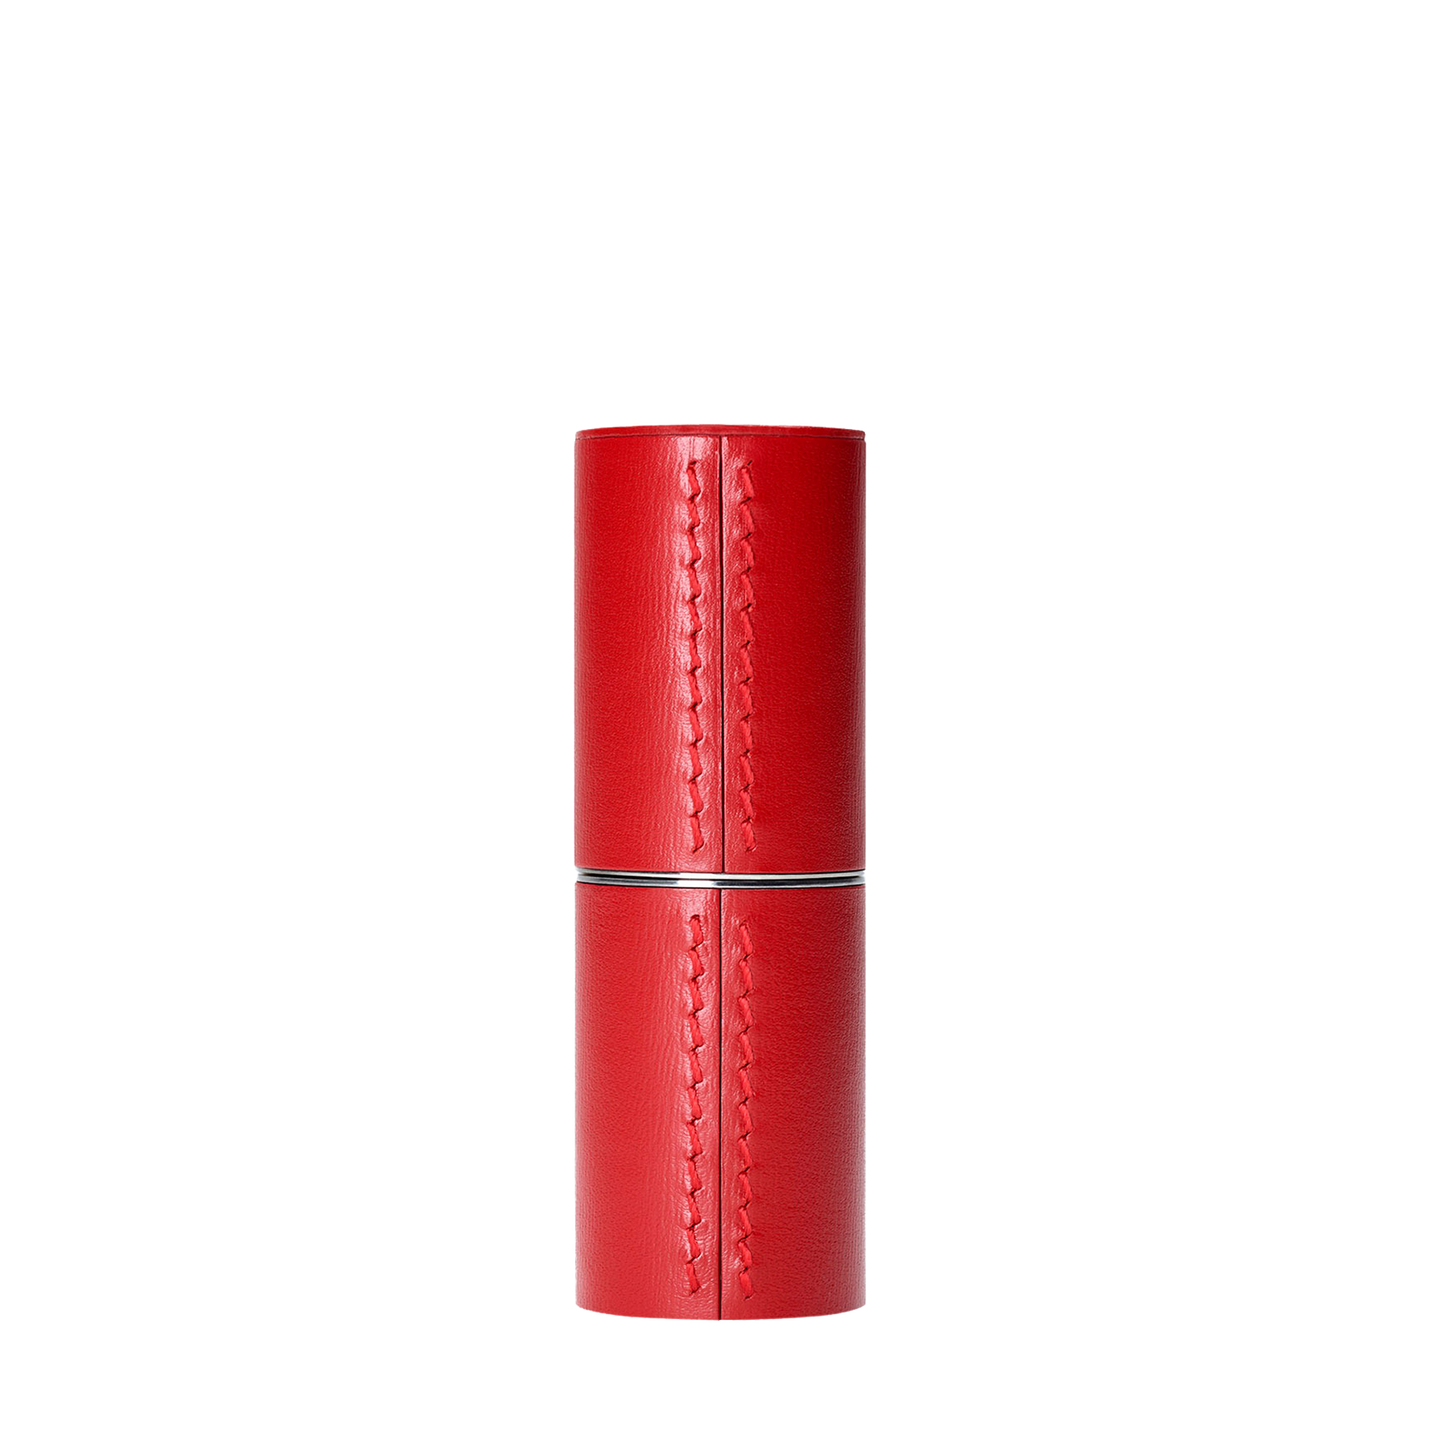 Refillable Red fine leather lipstick case